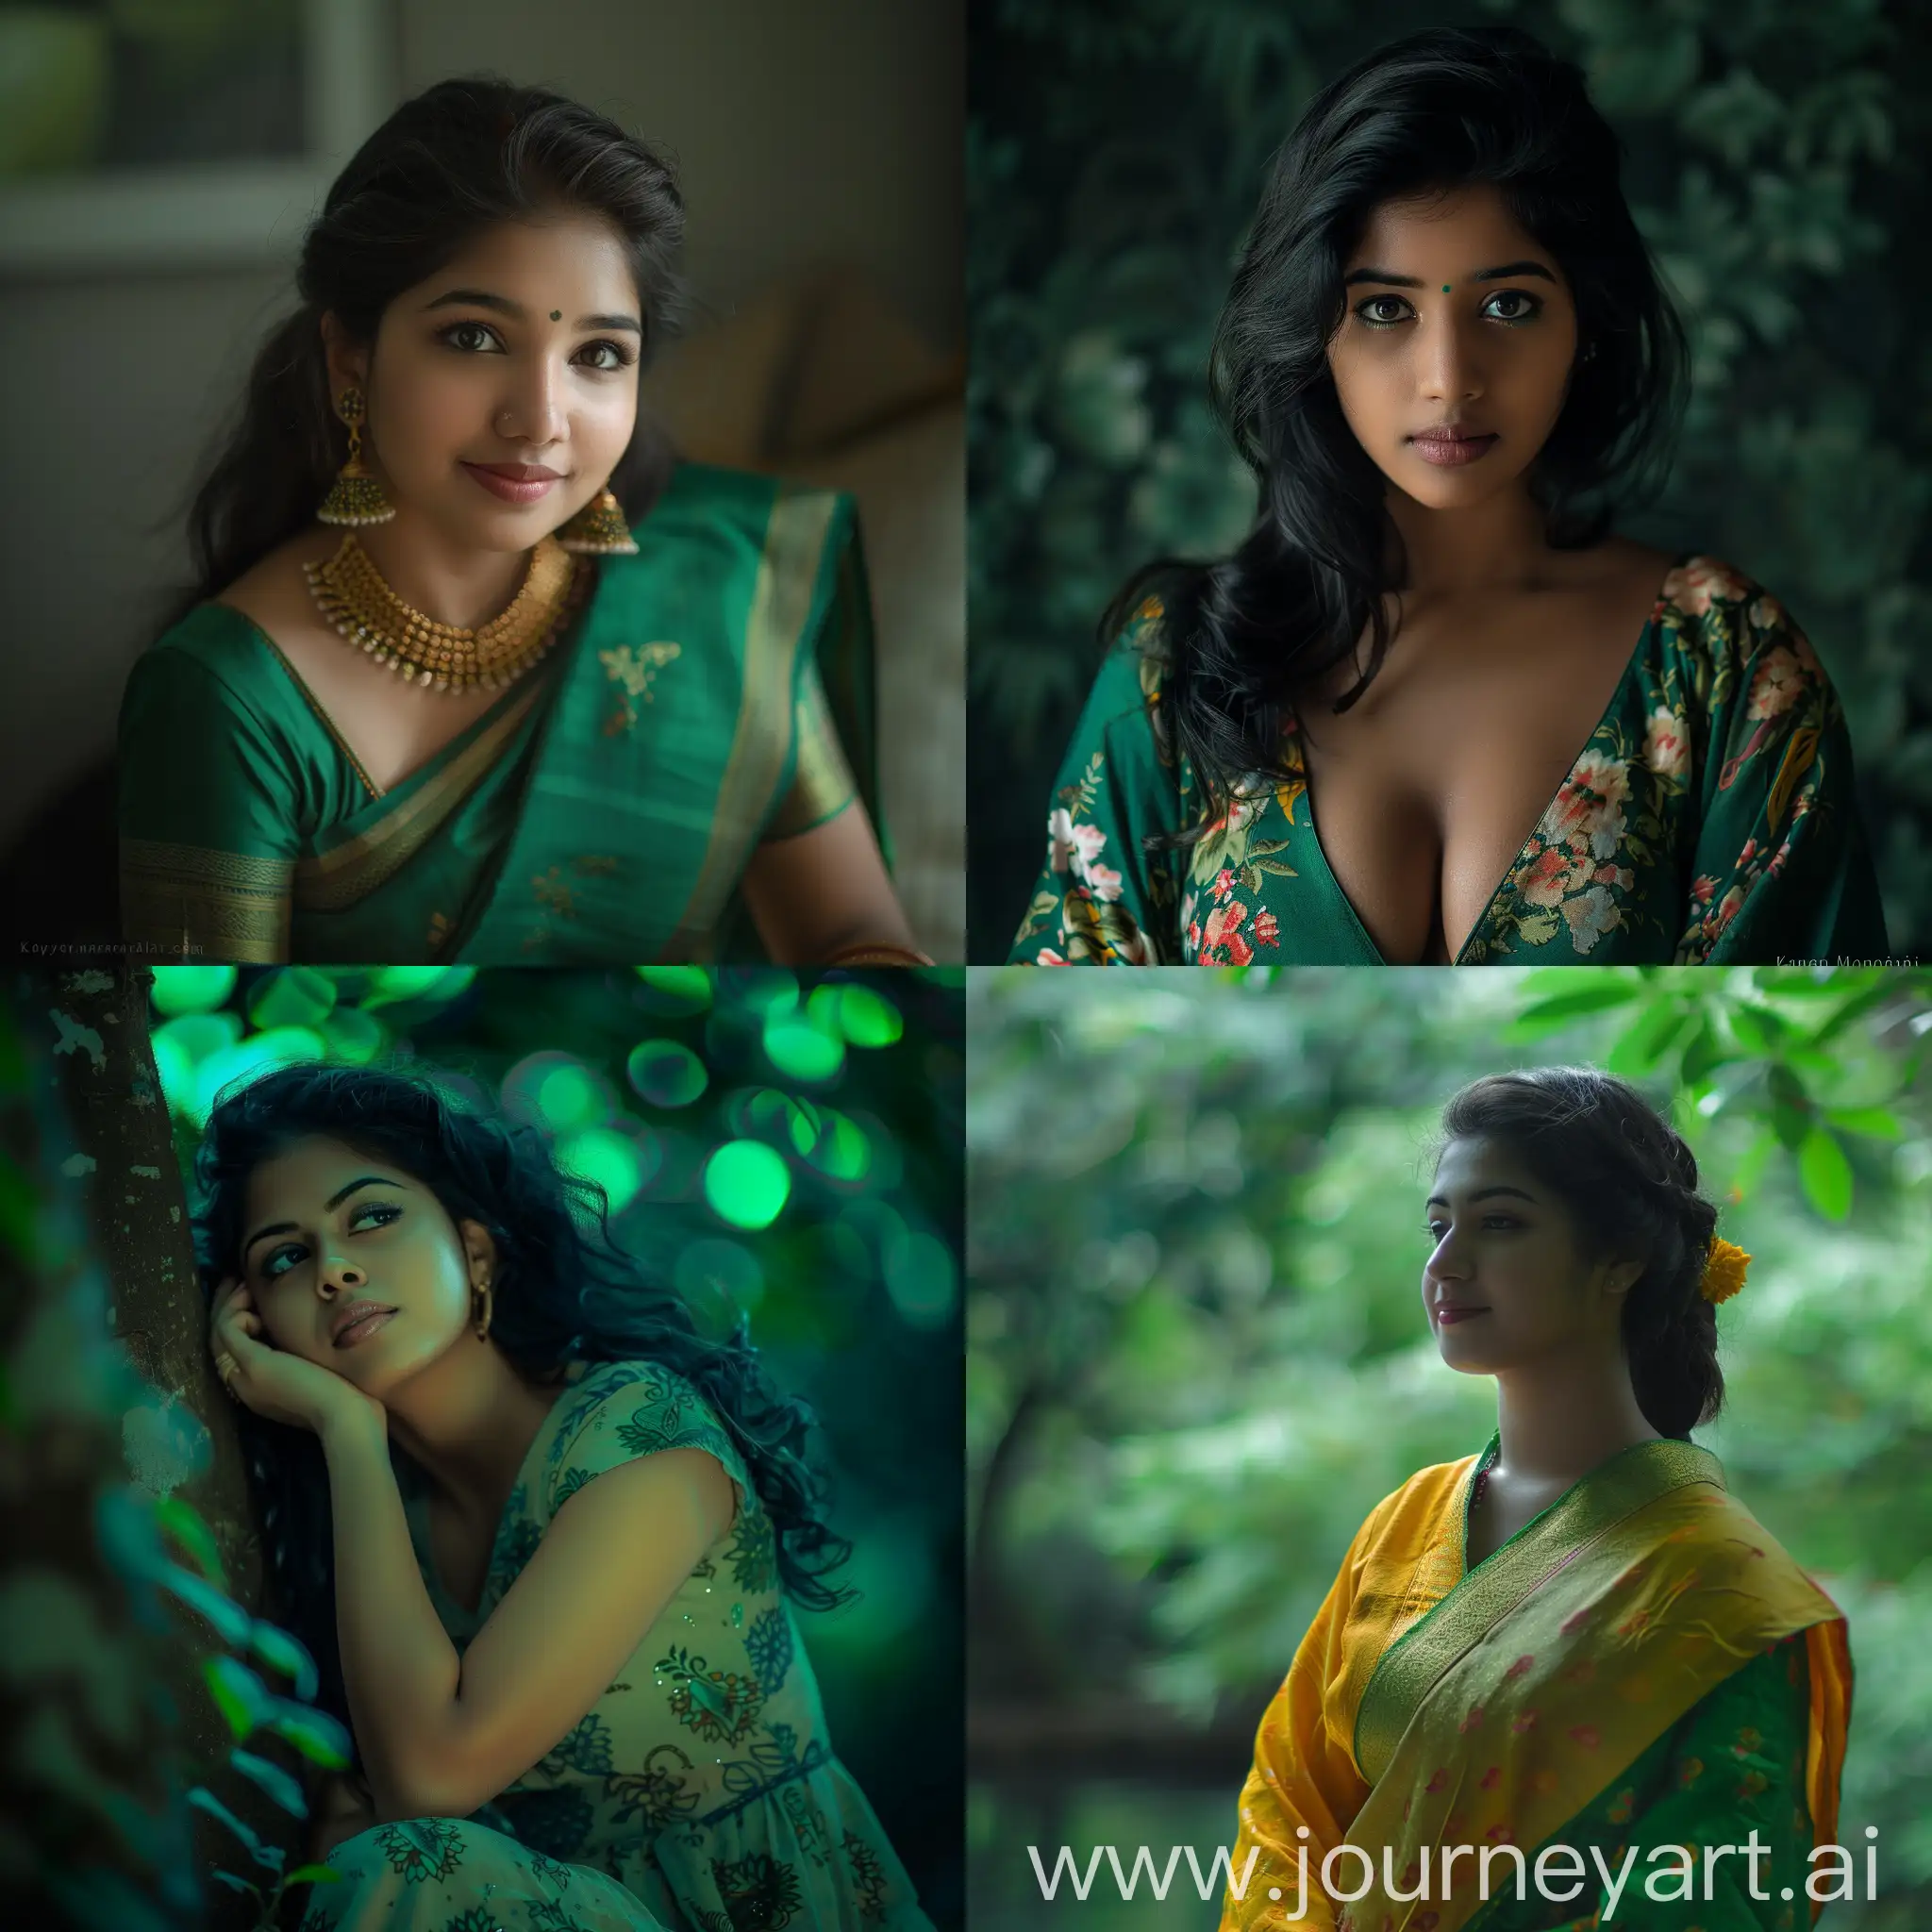 Kavya Manohari Meenakshi, a Malayali young woman from Kerala, extremely beautiful, curvy, alluring, Japanese background, high quality, green tone, professional photography, canon lens, 64 pixel, RAW photo